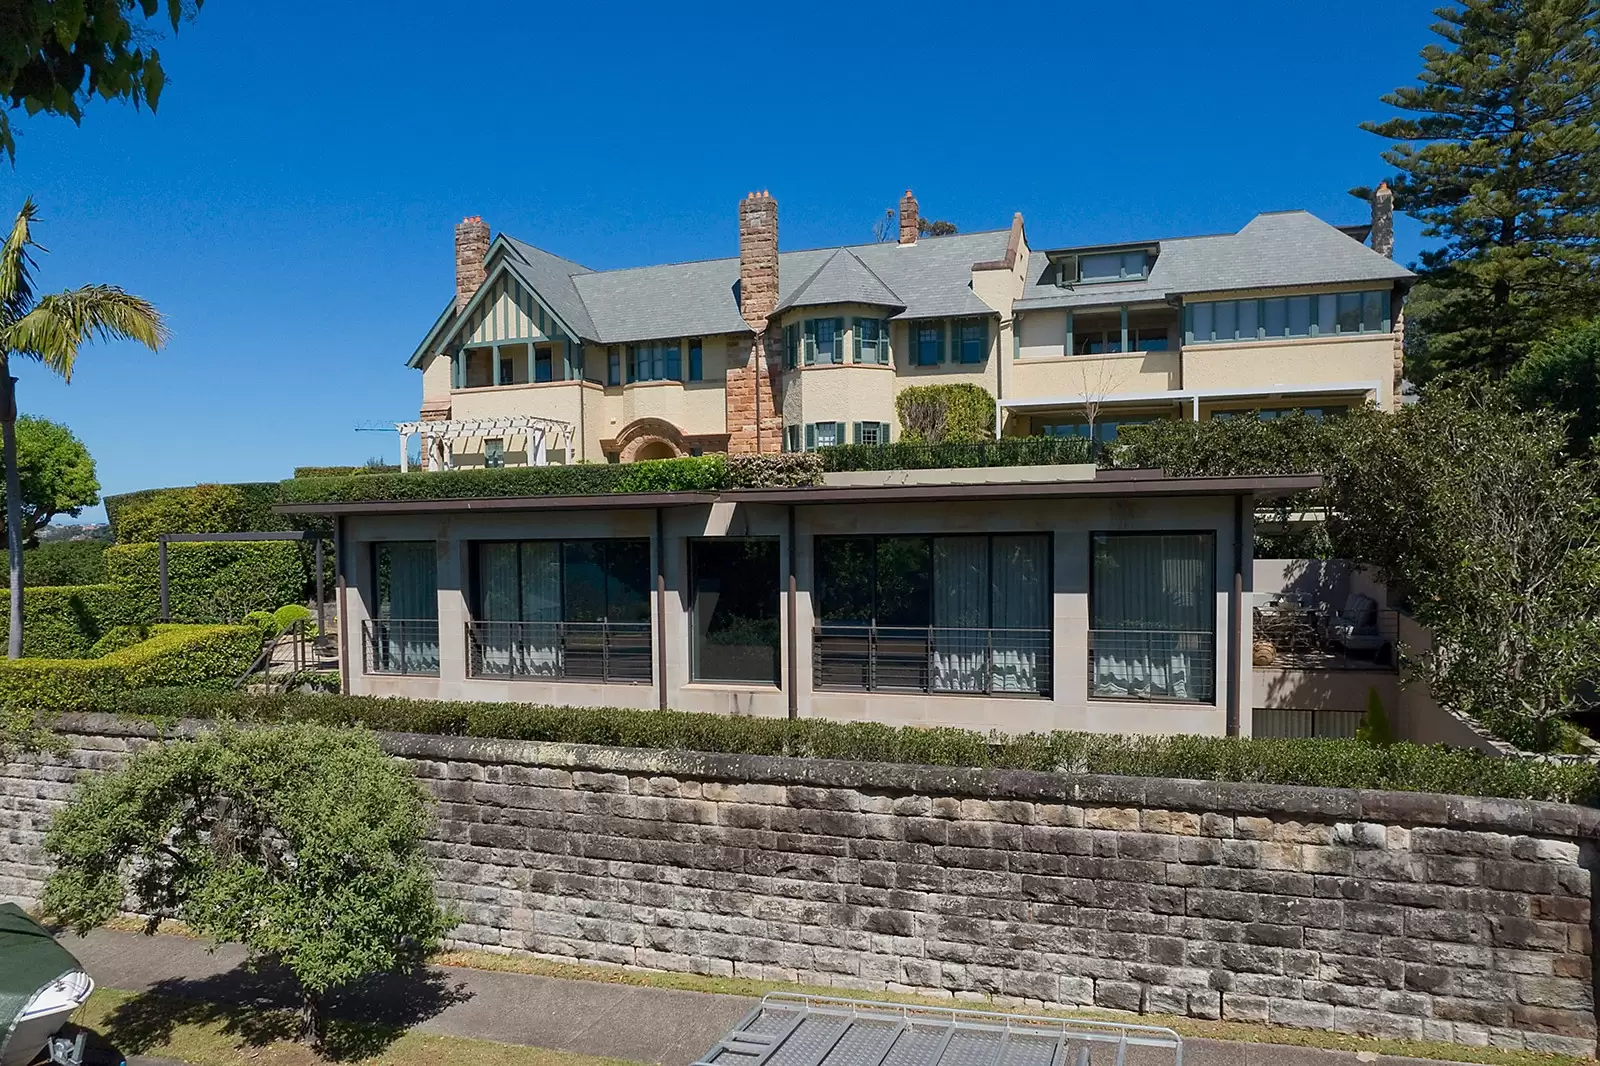 Photo #4: 6B Wentworth Street, Point Piper - Sold by Sydney Sotheby's International Realty